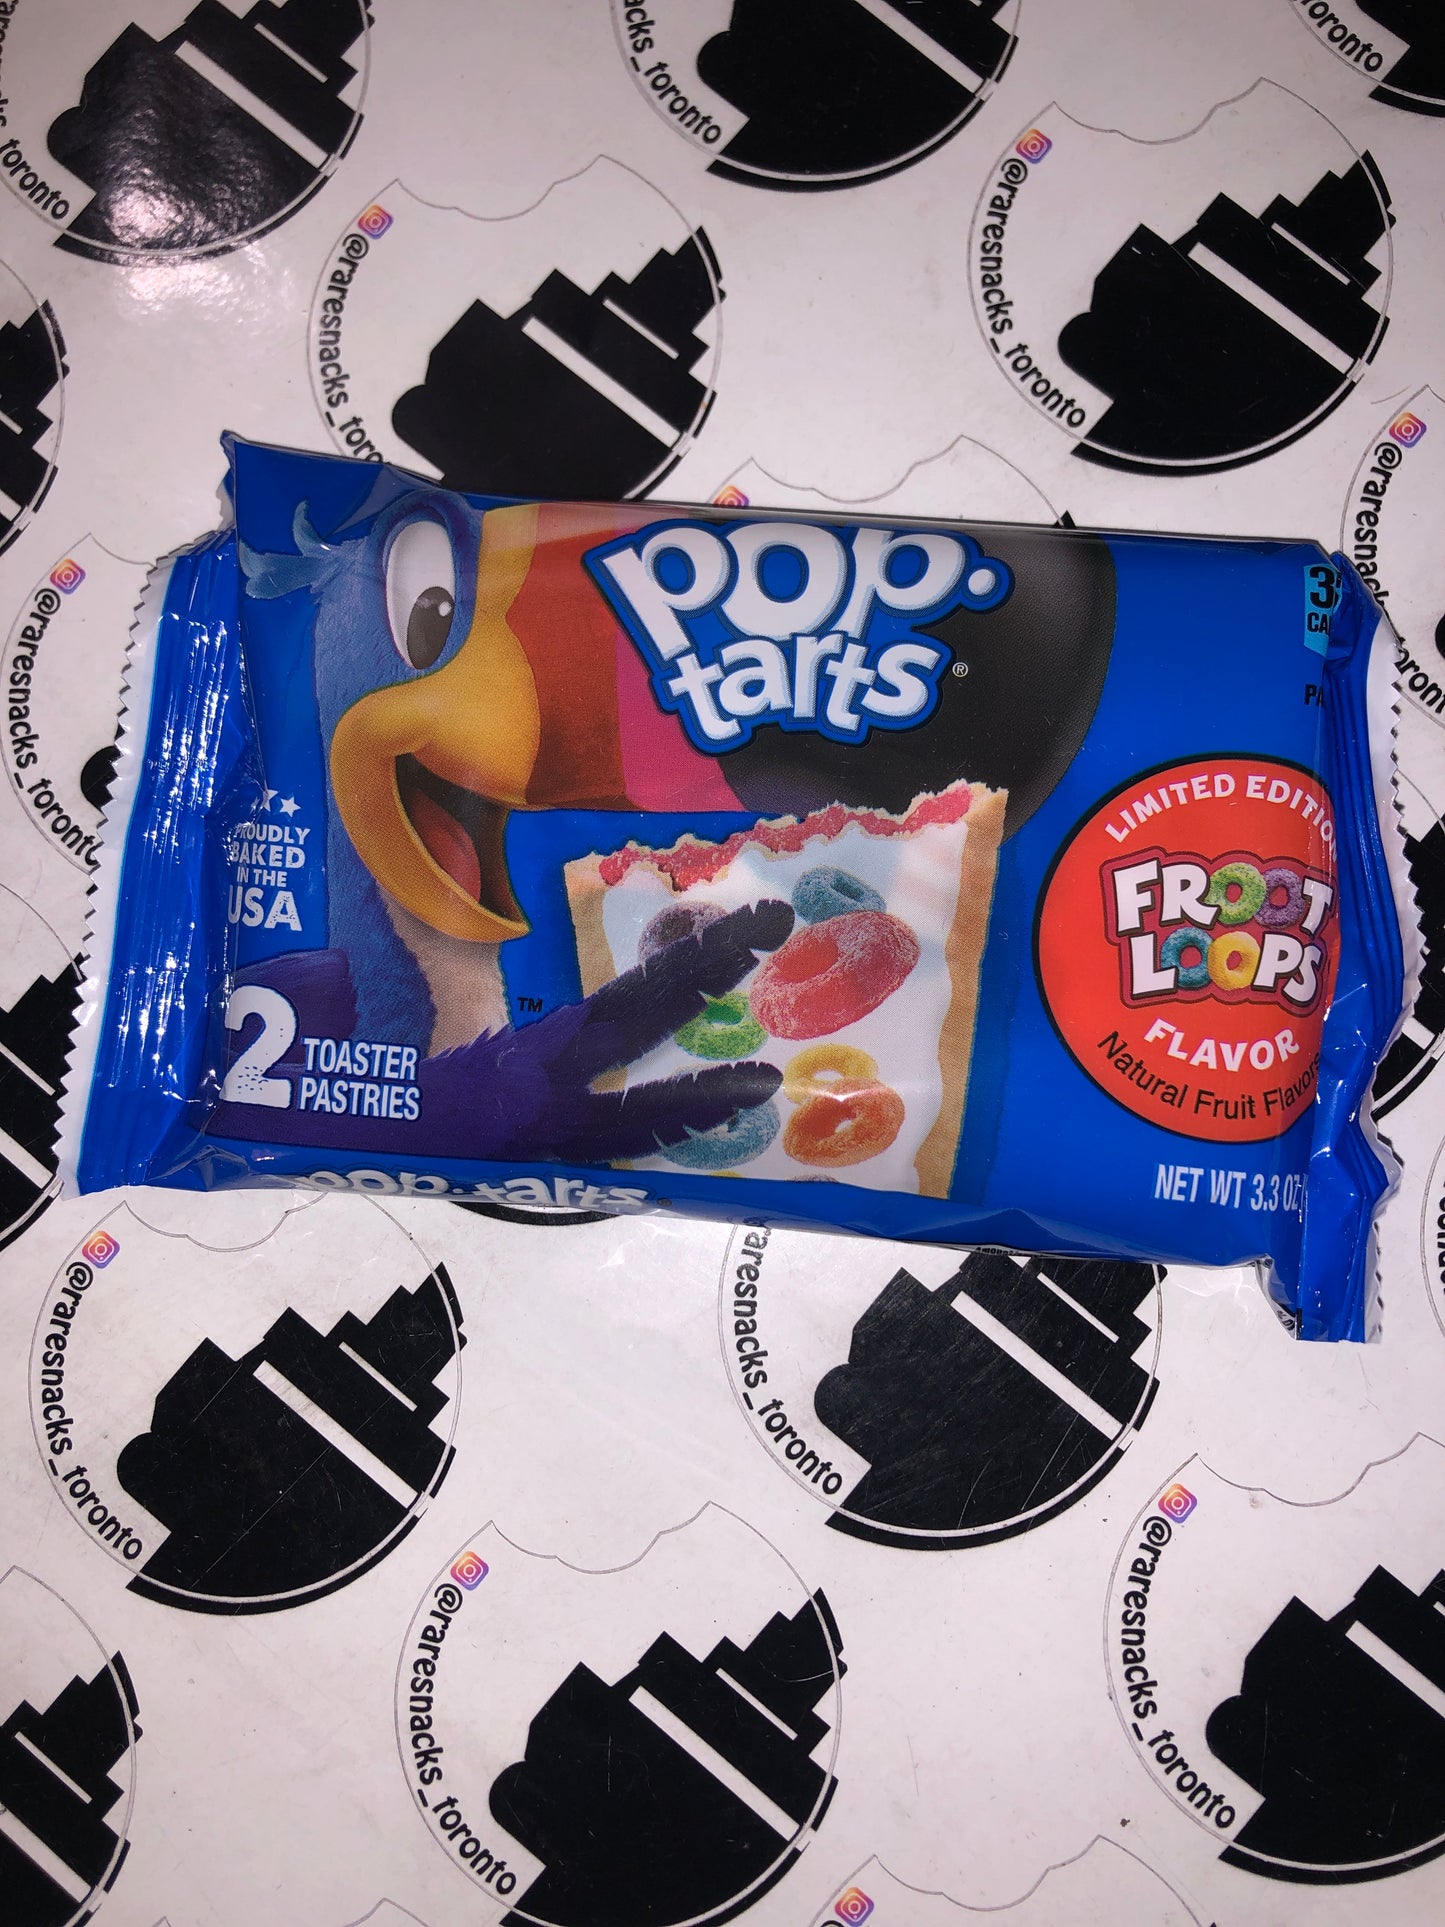 Pop tarts Froot Loops Limited Edition 2pk